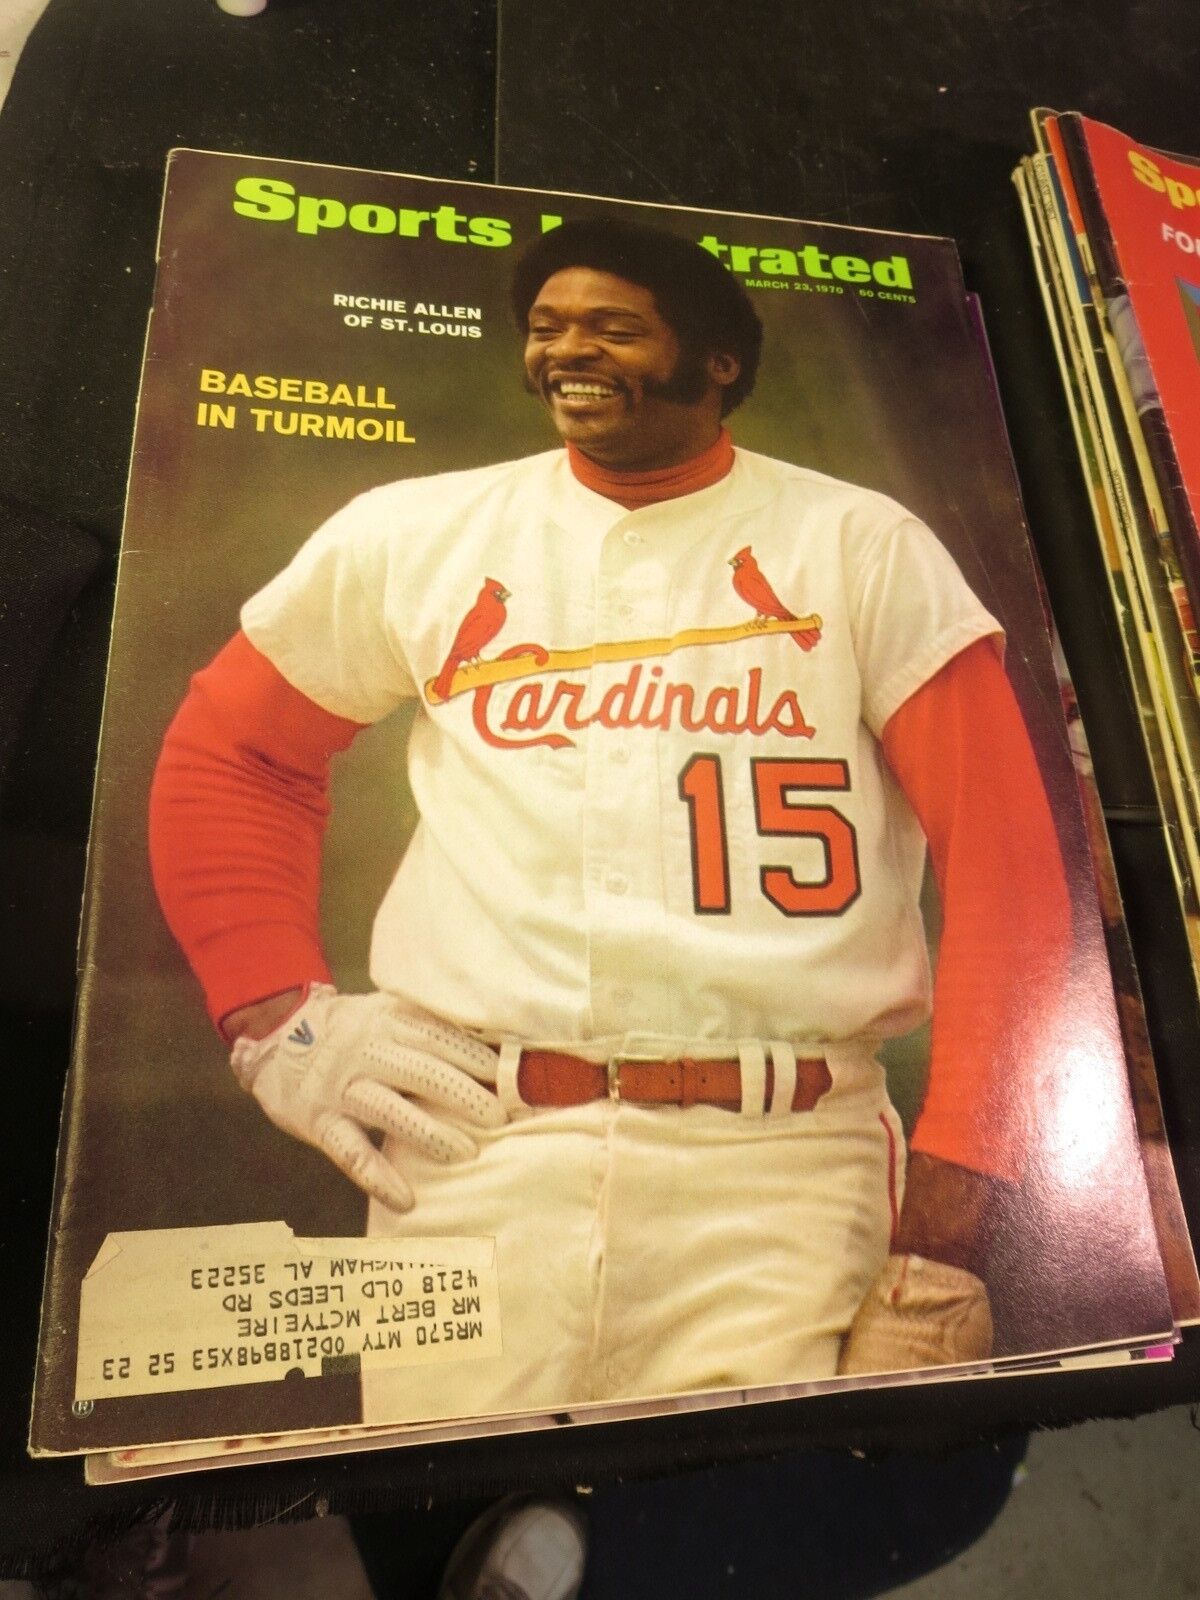 Sports Illustrated March 23, 1970 Richie Allen Baseball Good Condition 